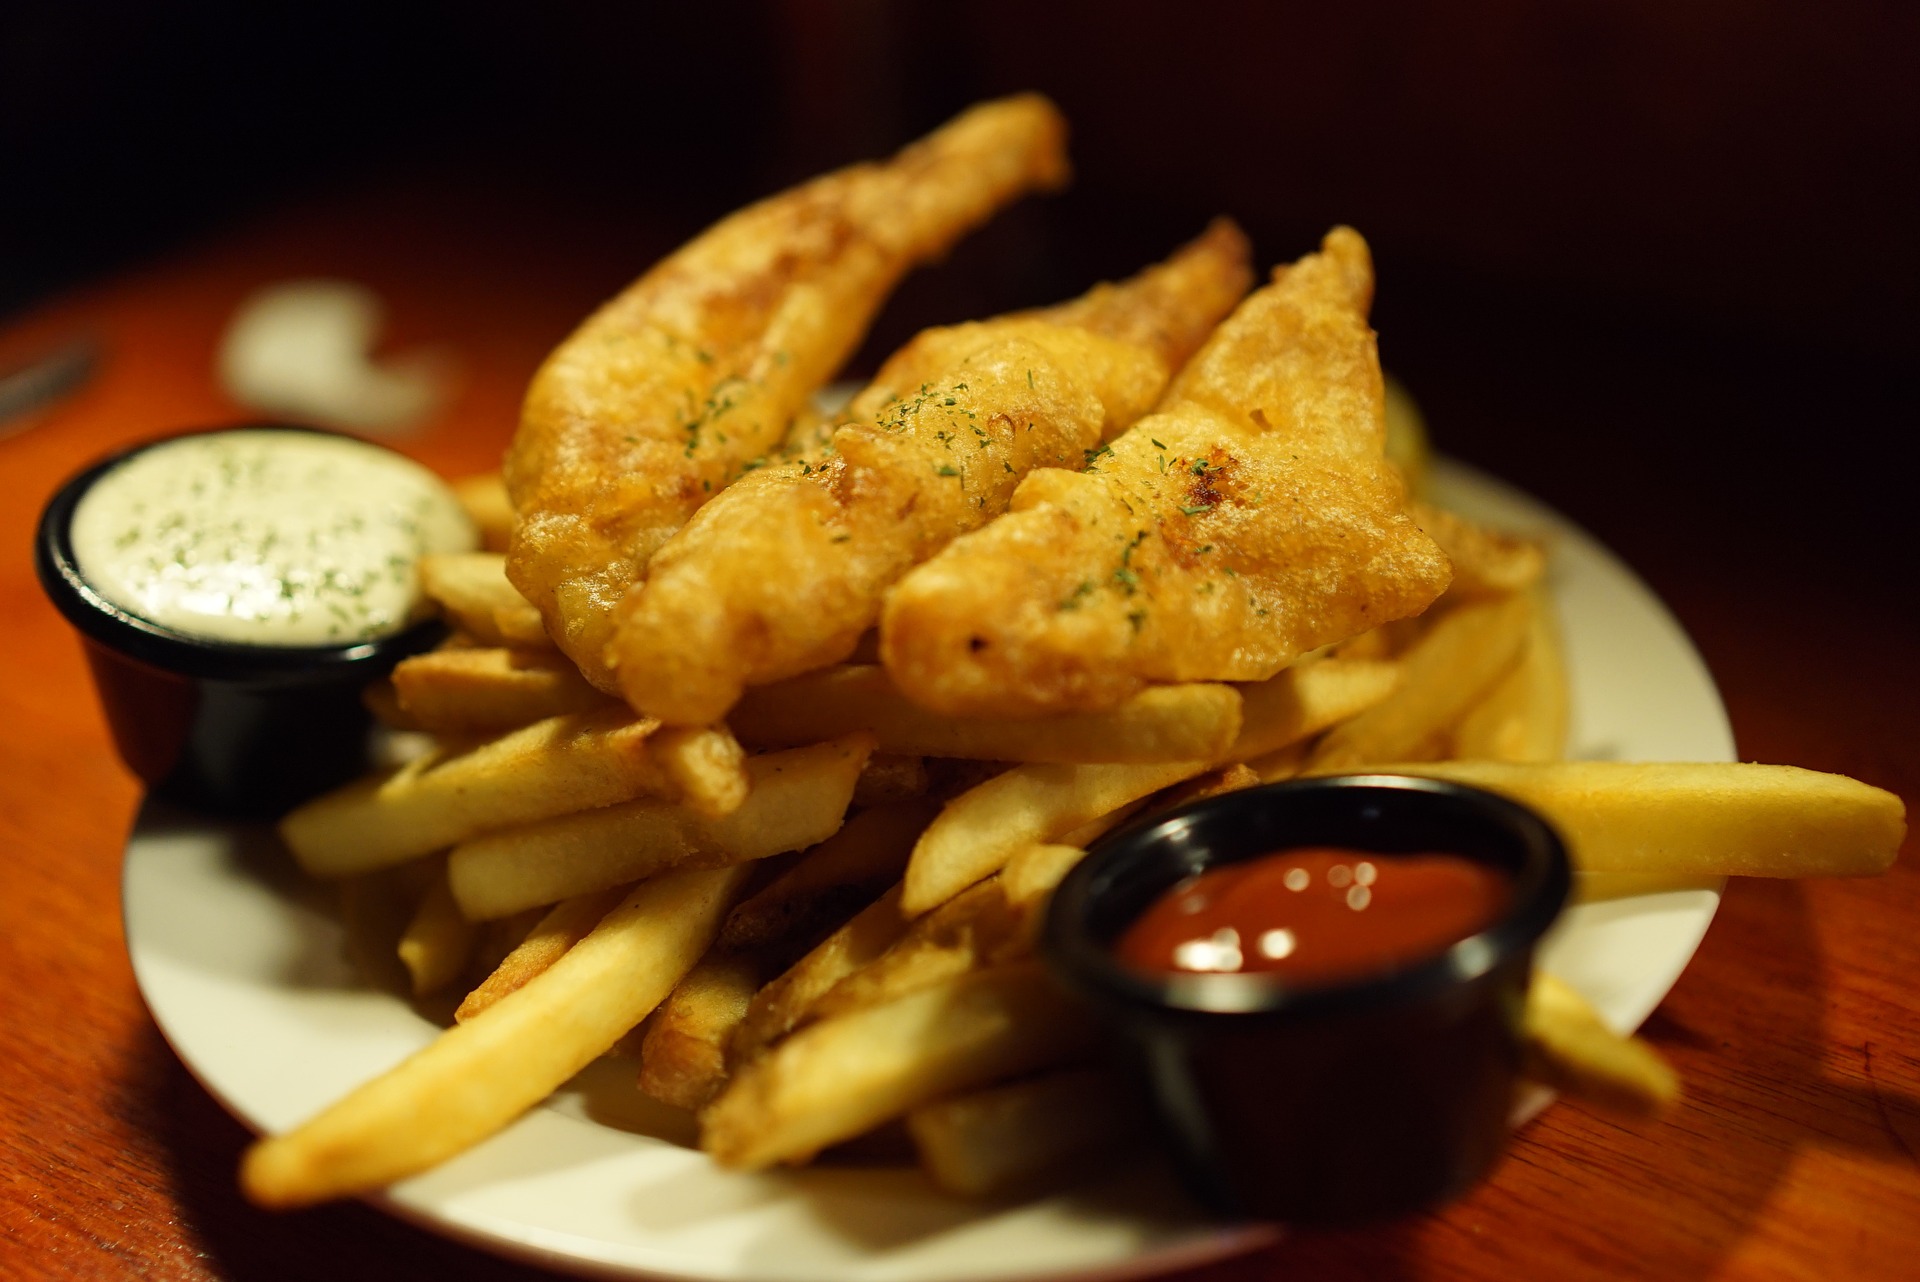 fish_and_chips_656223_1920.jpg